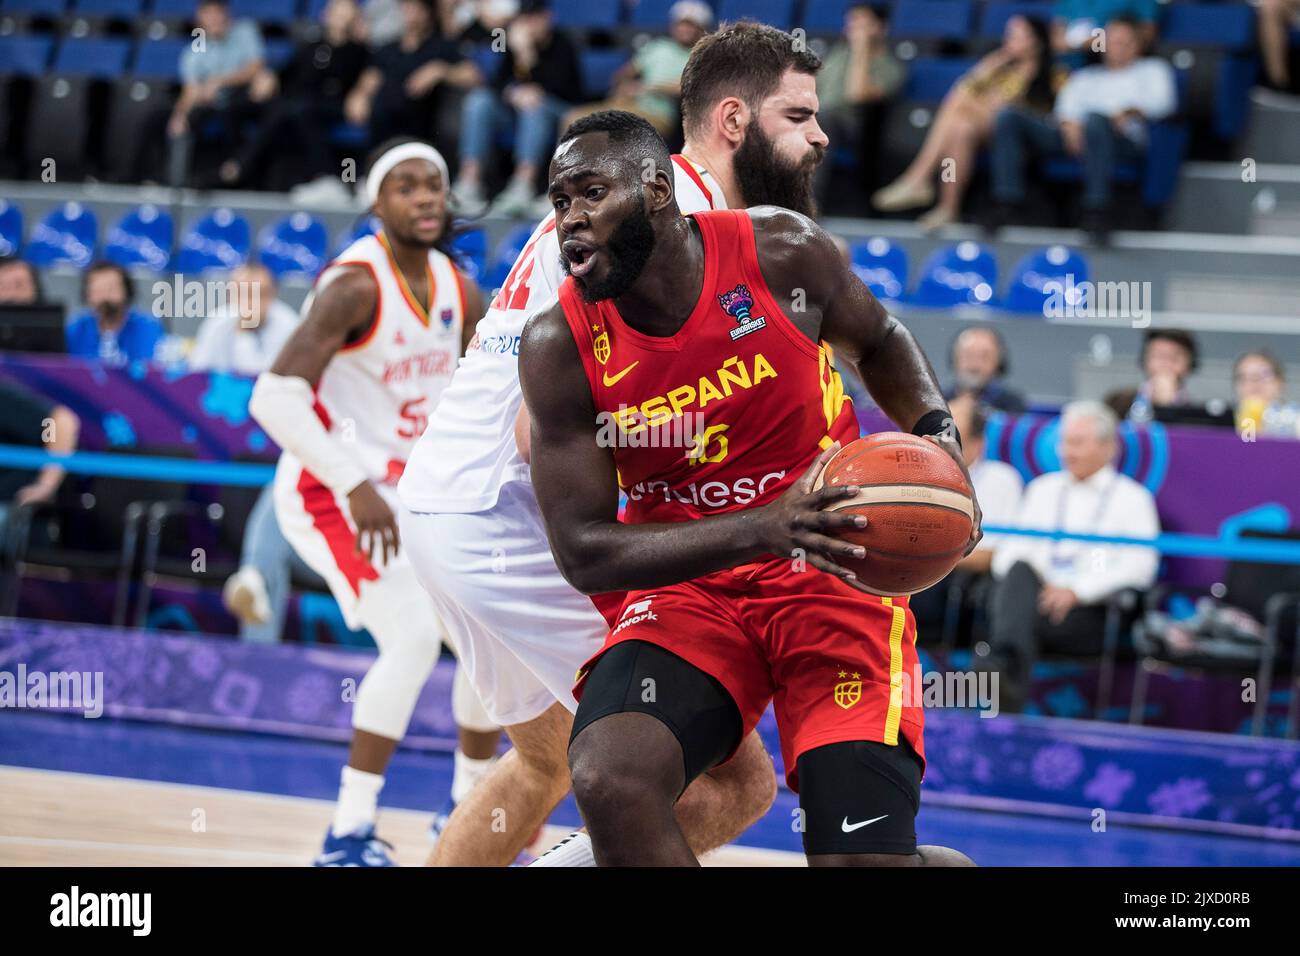 Tbilisi, Georgia, 6th September 2022. Usman Garuba of Spain competes against Bojan Dubljevic of Montenegro under the basket during the FIBA EuroBasket 2022 group A match between Montenegro and Spain at Tbilisi Arena in Tbilisi, Georgia. September 6, 2022. Credit: Nikola Krstic/Alamy Stock Photo